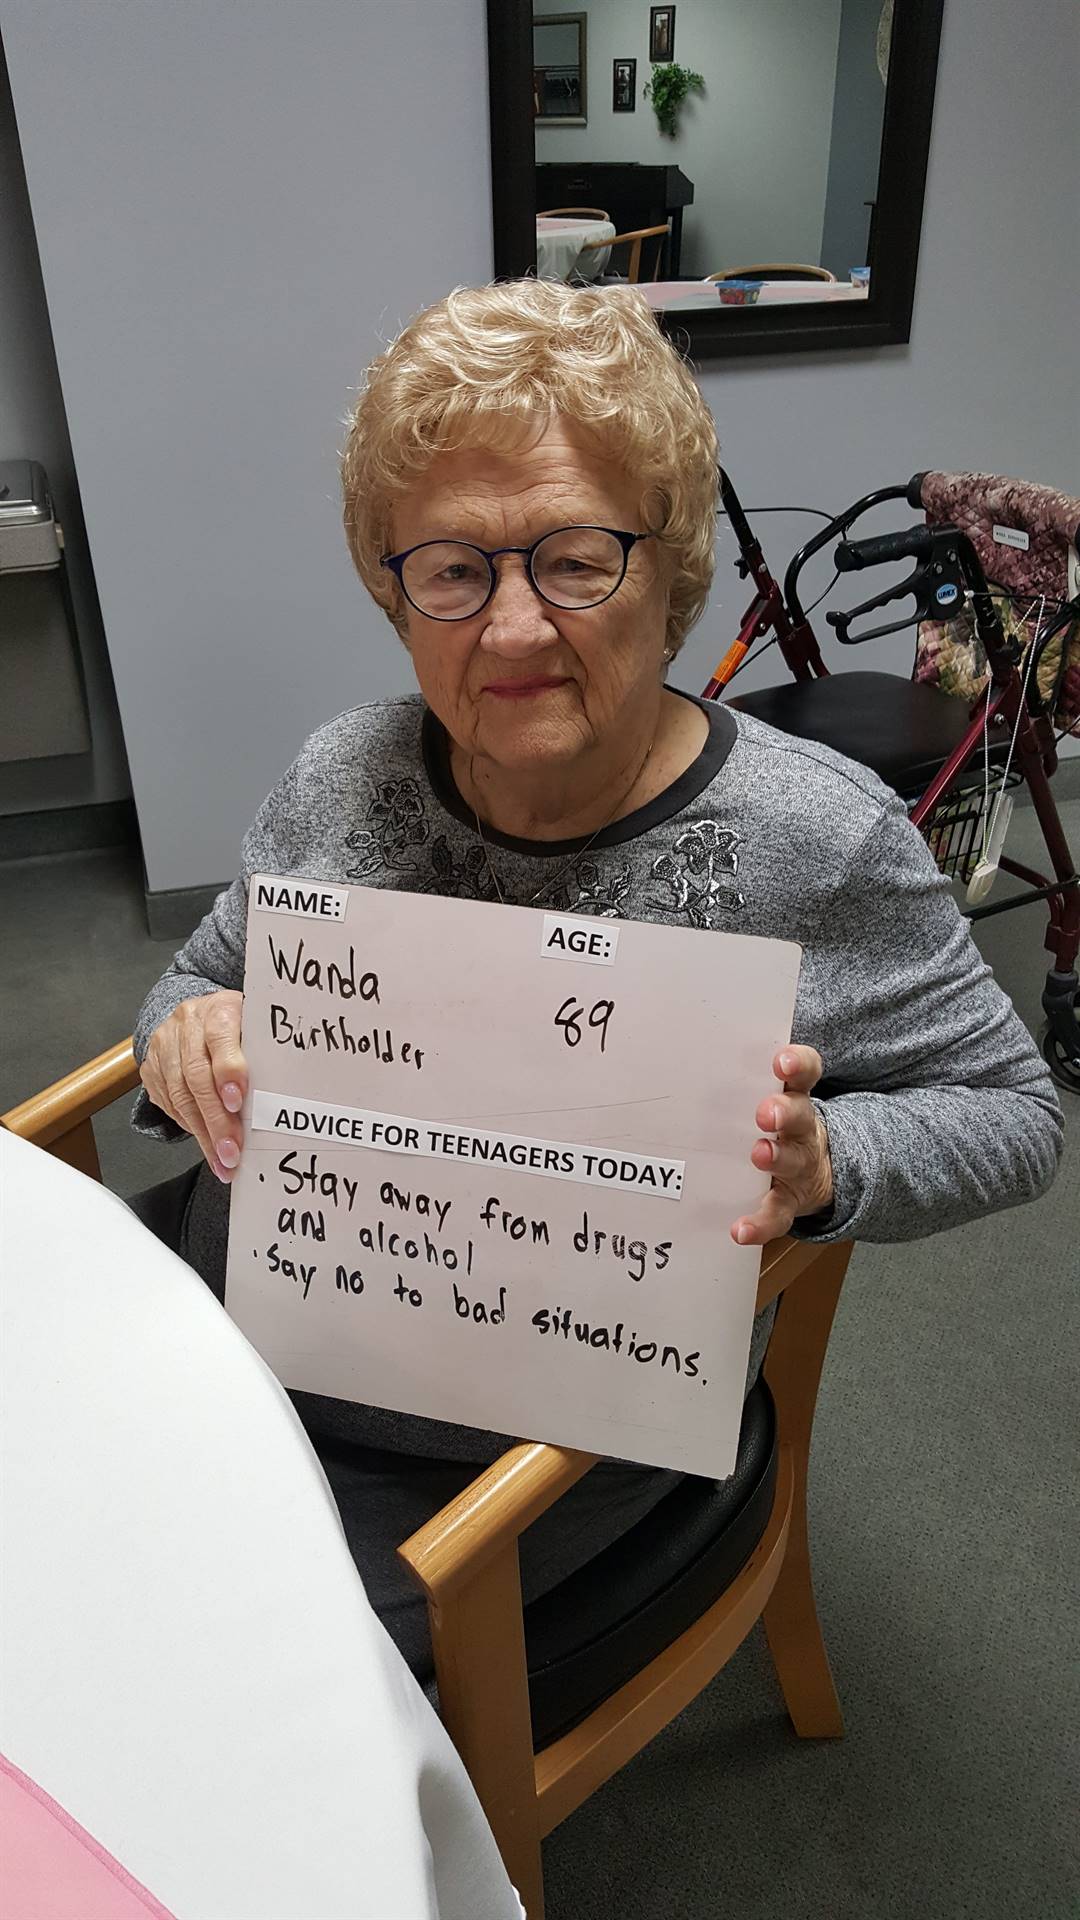 Stay away from drugs & alcohol, say no to bad situations. Ms. Wanda Burkholder, 89 yrs young